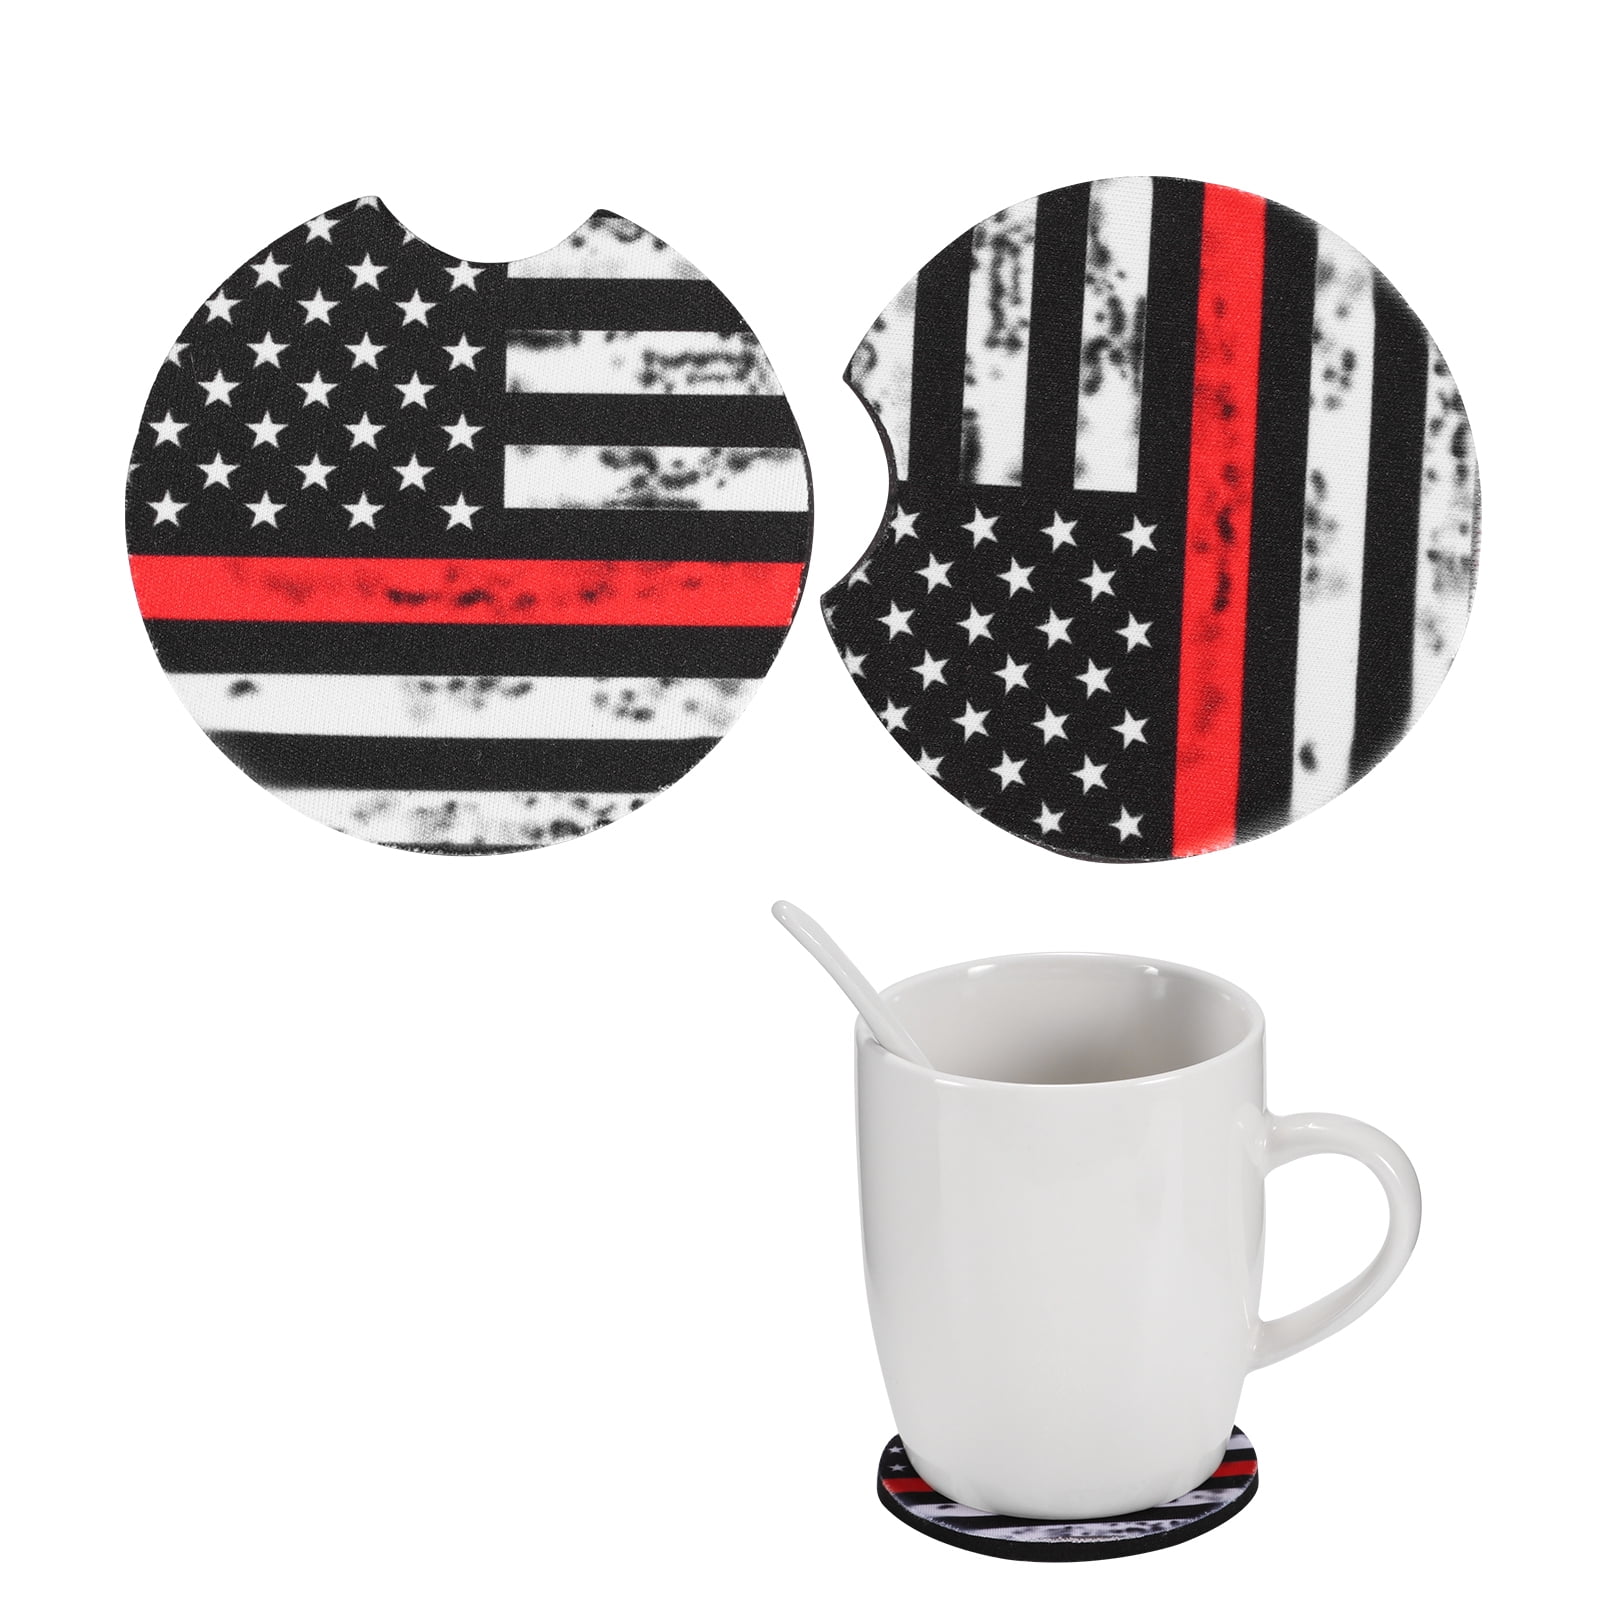 HEMOTON 4pcs Independence Day Coaster USA Flag Cup Mat Anti Slip Heat Insulation Cup Pad PVC Patriotic Car Cup Coaster Drink Cup Holder for 4th of July Gift Black